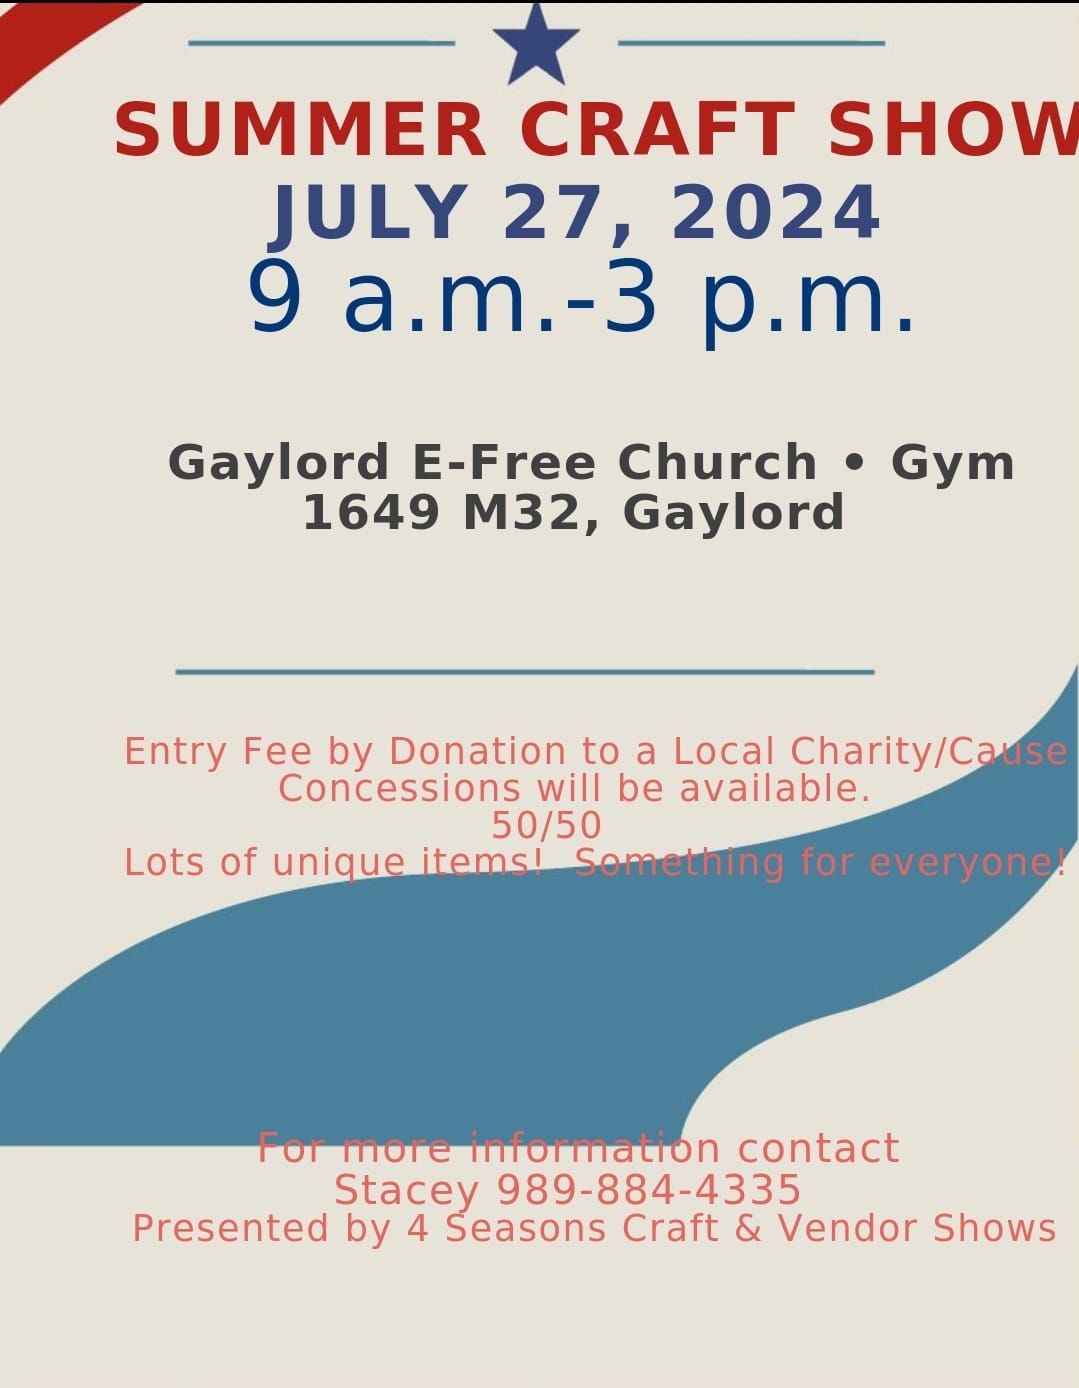 Christmas in July Summer Craft\/Vendor Show- Gaylord E-Free Church Holiday Craft & Vendor Show 